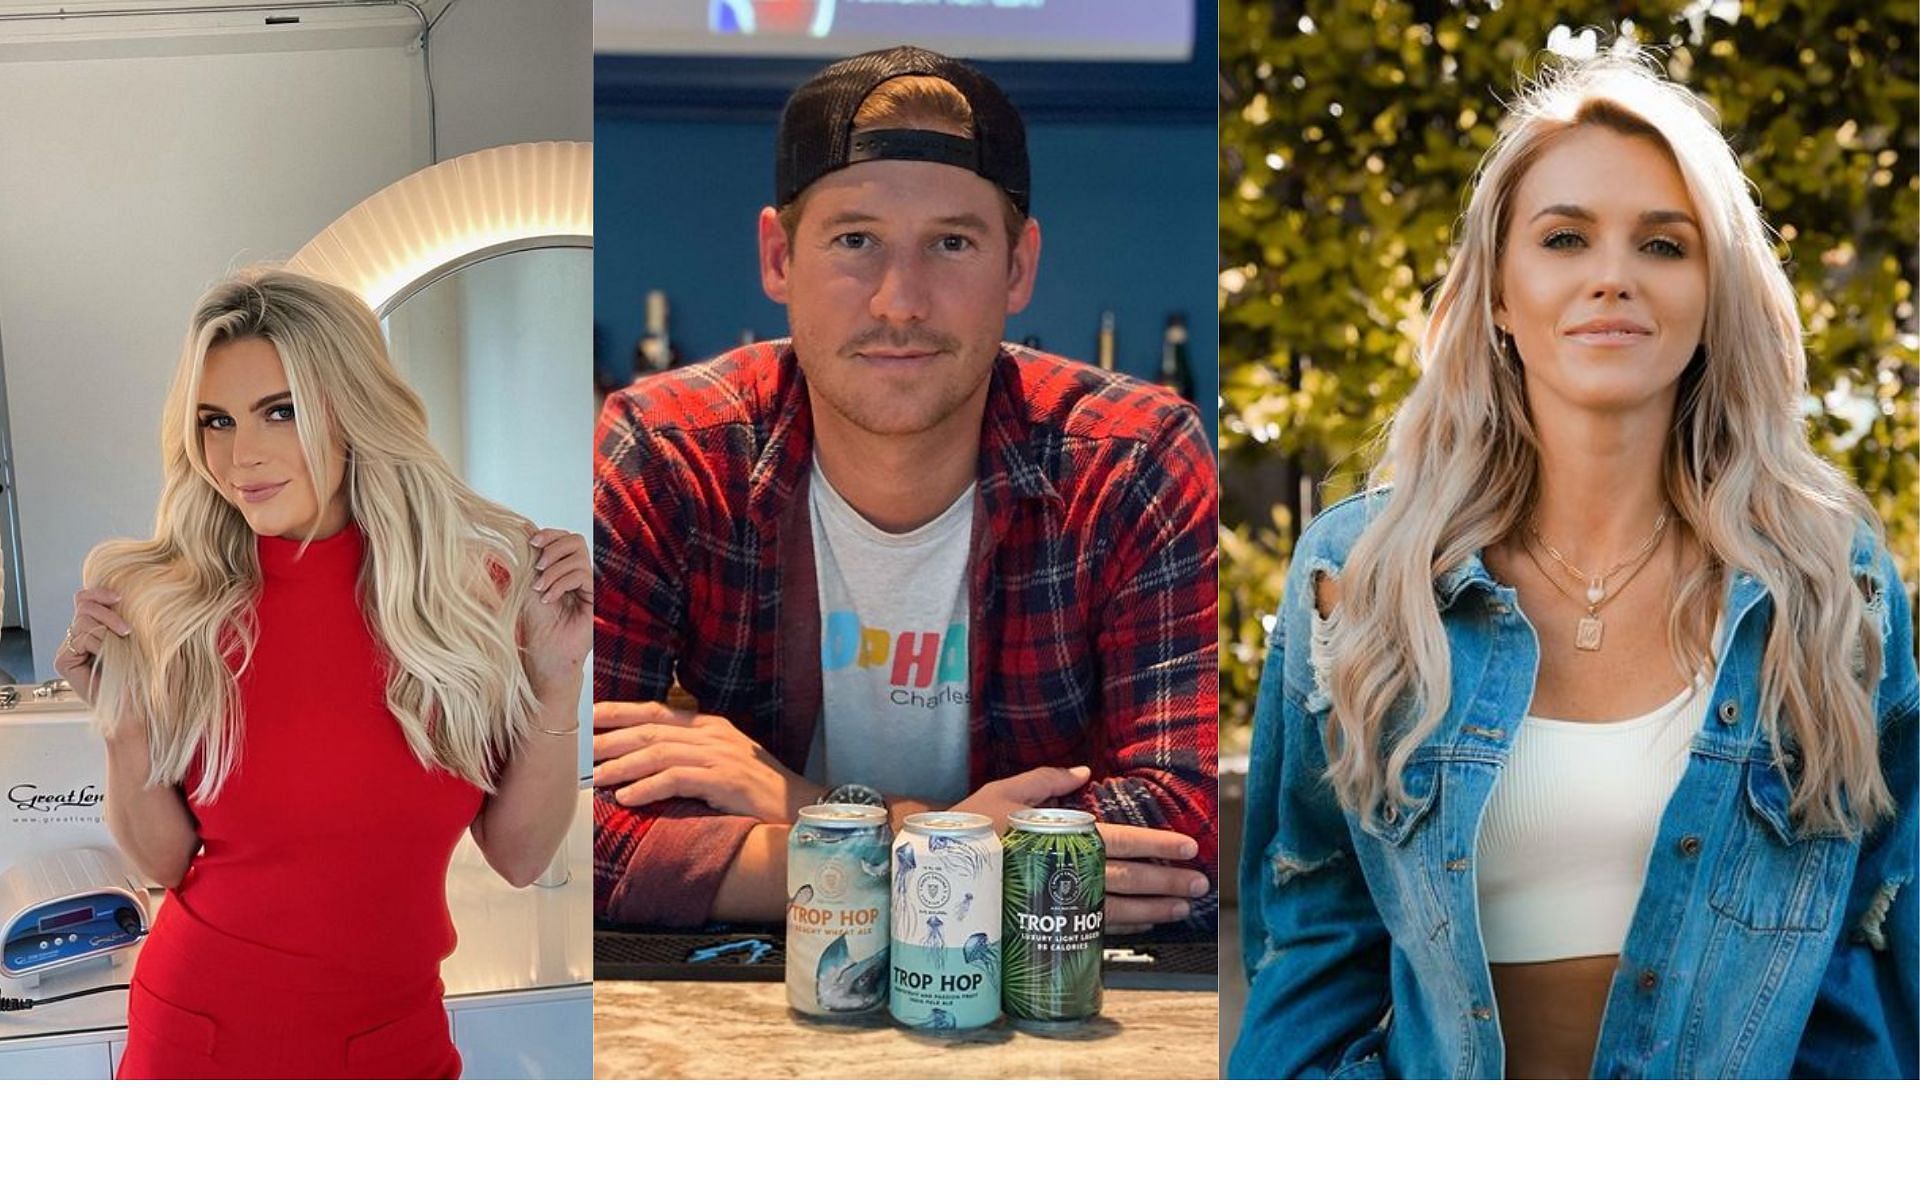 Fans believe Austen&rsquo;s ex and new girlfriend look alike (Images via oliviabflowers, madison.lecroy and krollthewarriorking)